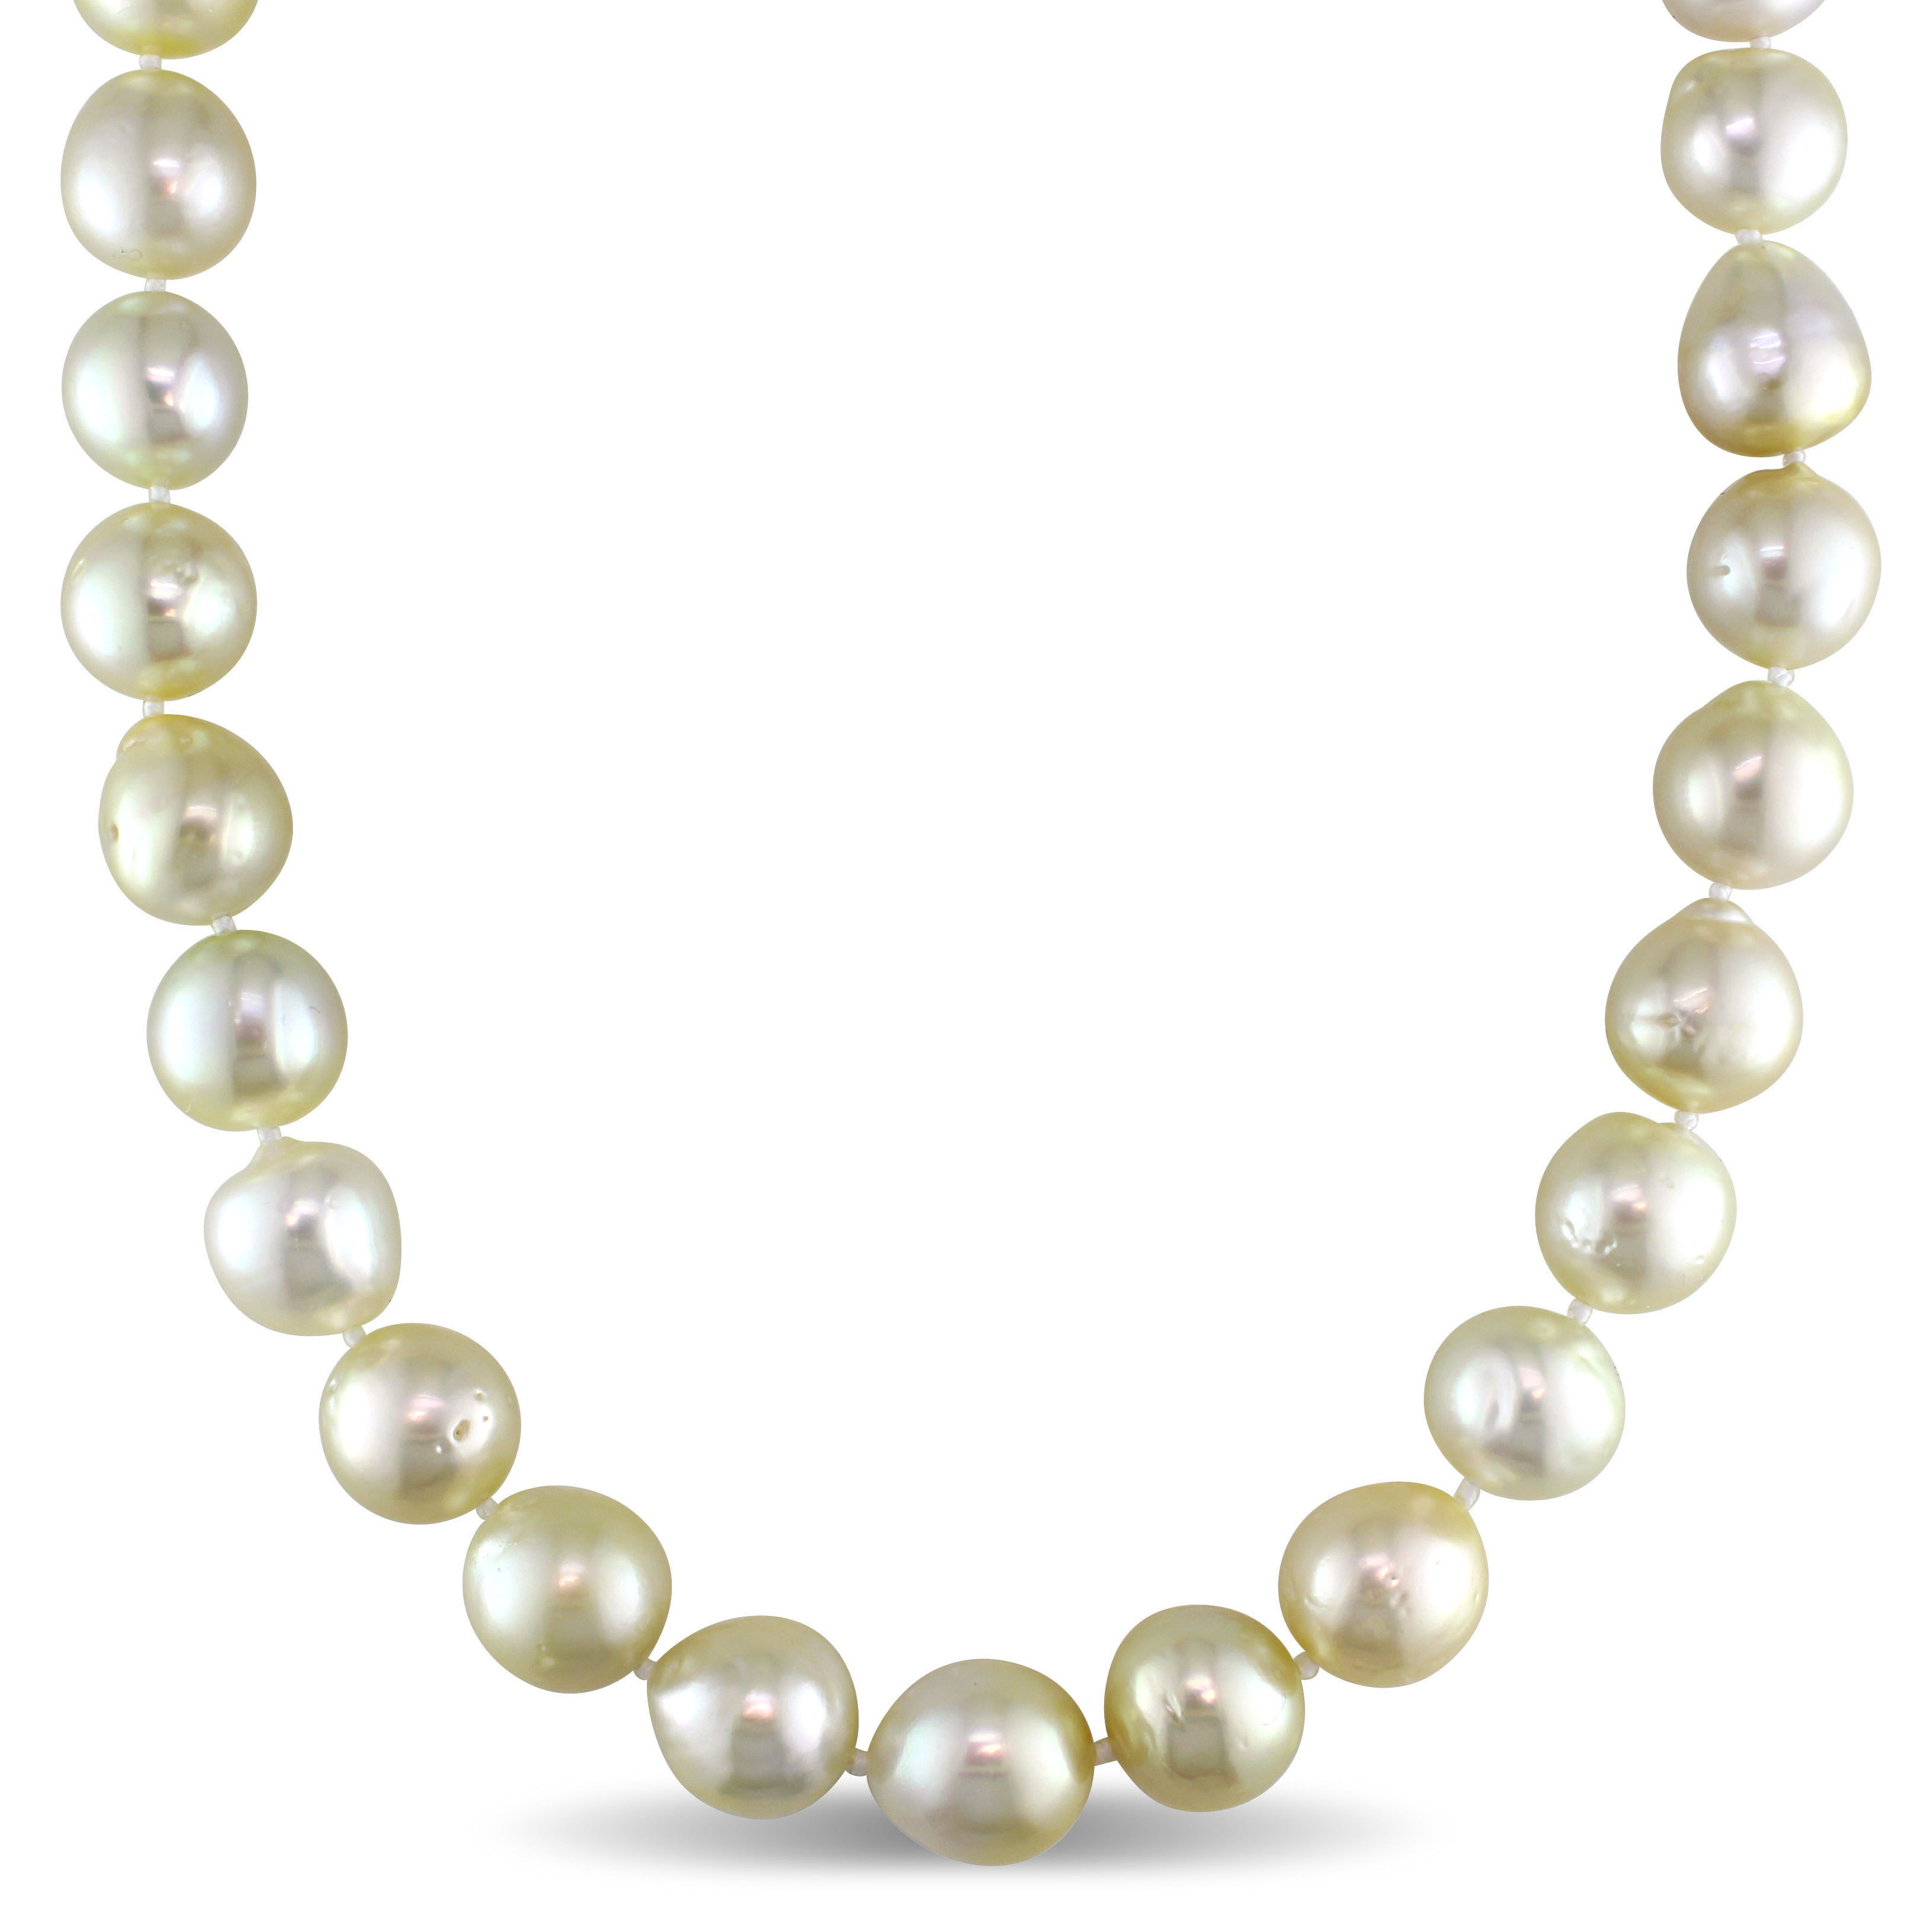 11-12 MM Natural Shape Golden South Sea Pearl Strand Necklace with